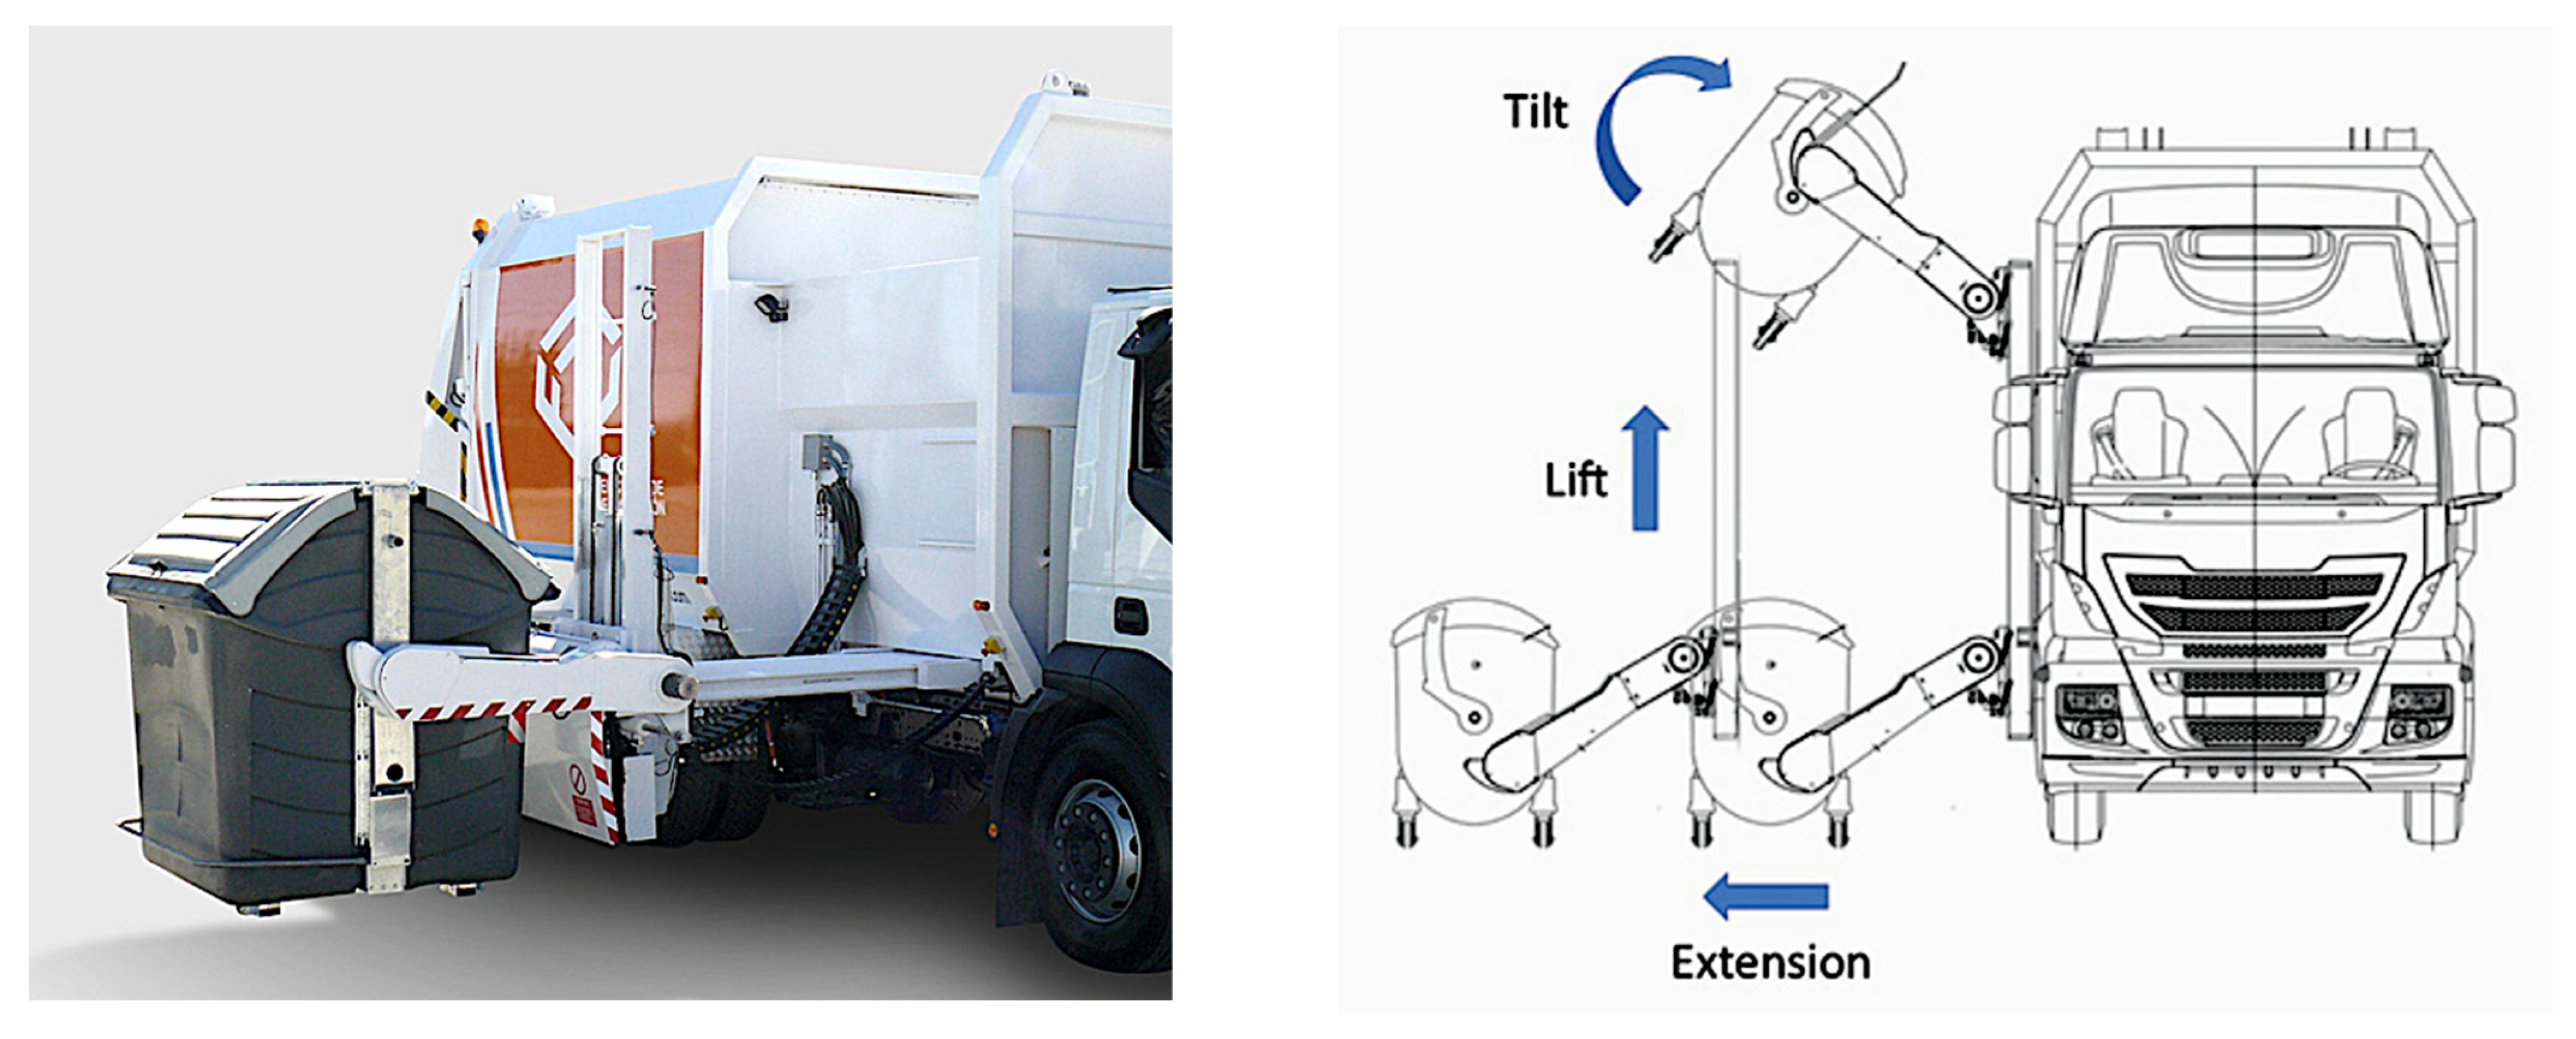 Energies | Free Full-Text | Multi-Point-of-View Energy Loss Analysis in a  Refuse Truck Hydraulic System